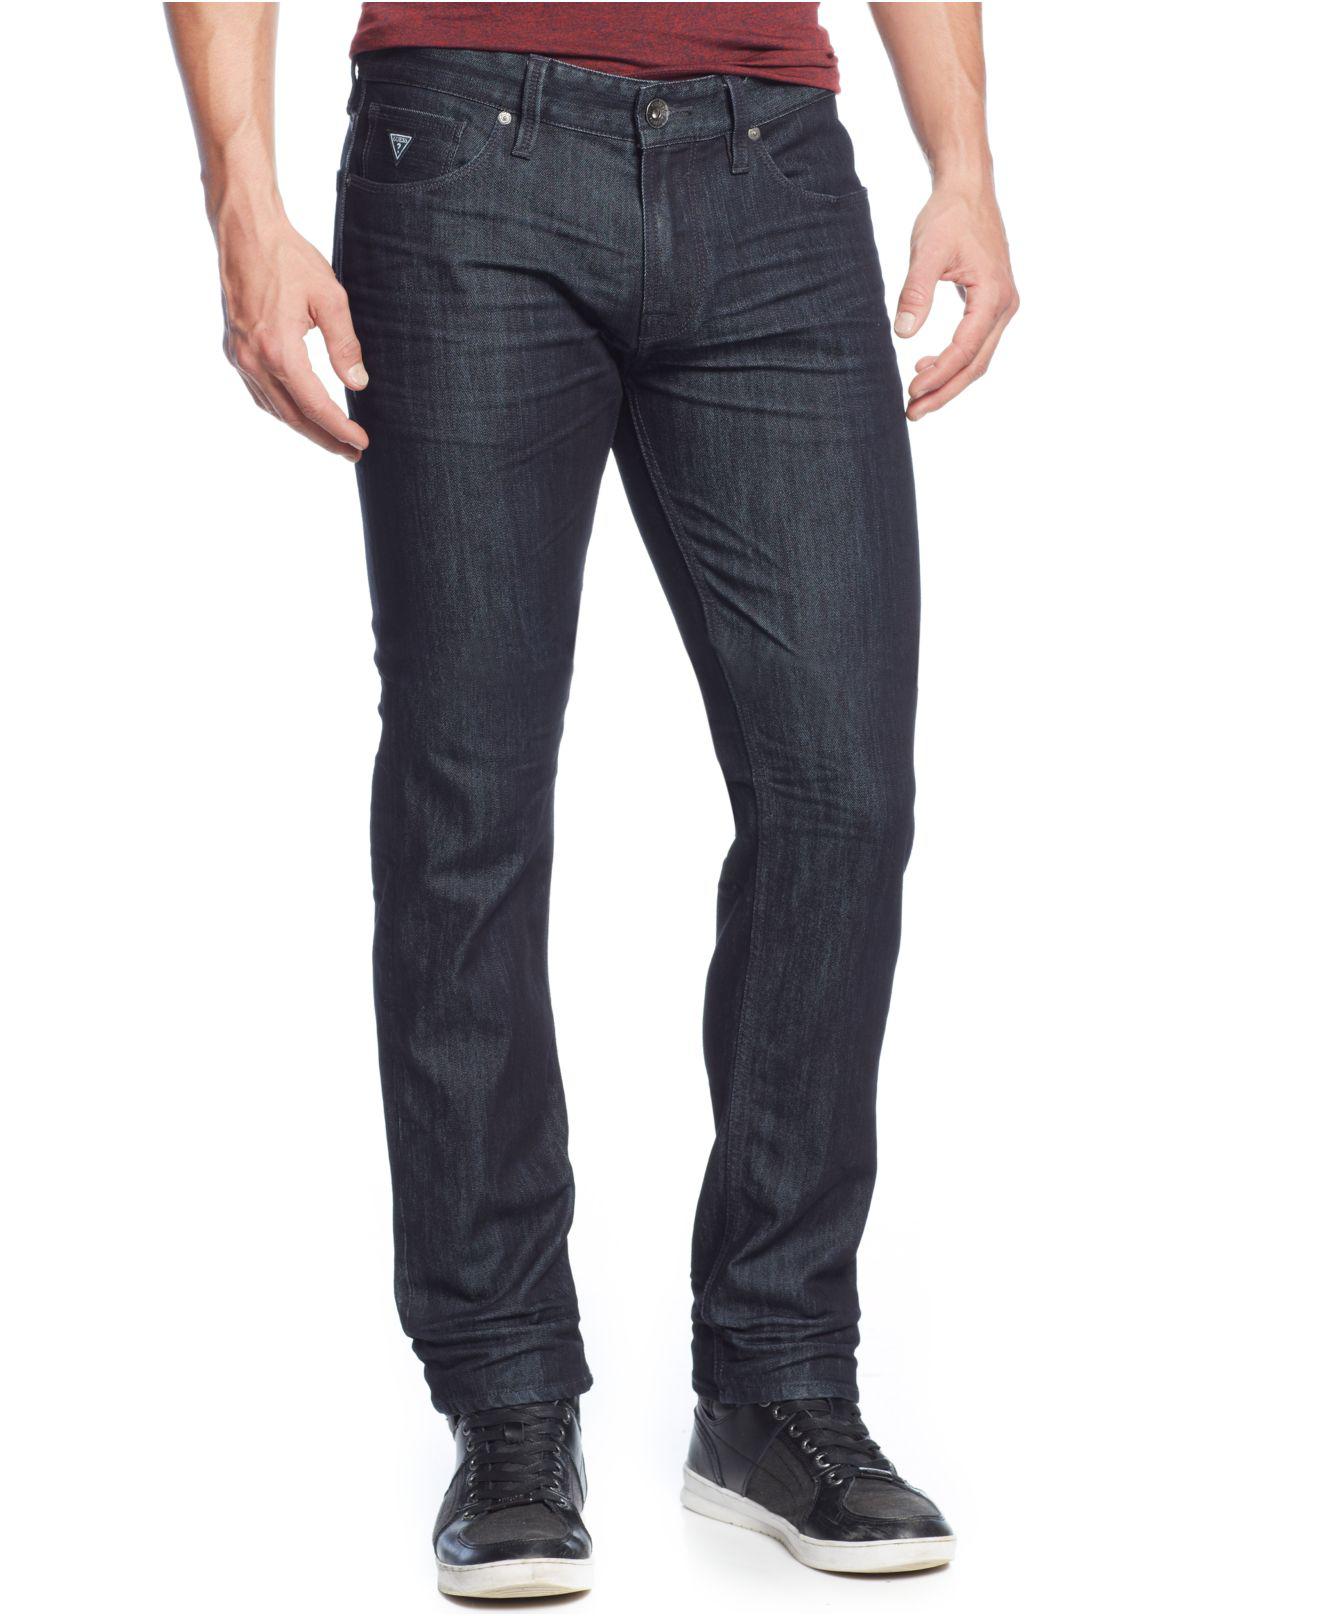 Lyst - Guess Slim-straight Smokescreen-wash Jeans in Blue for Men